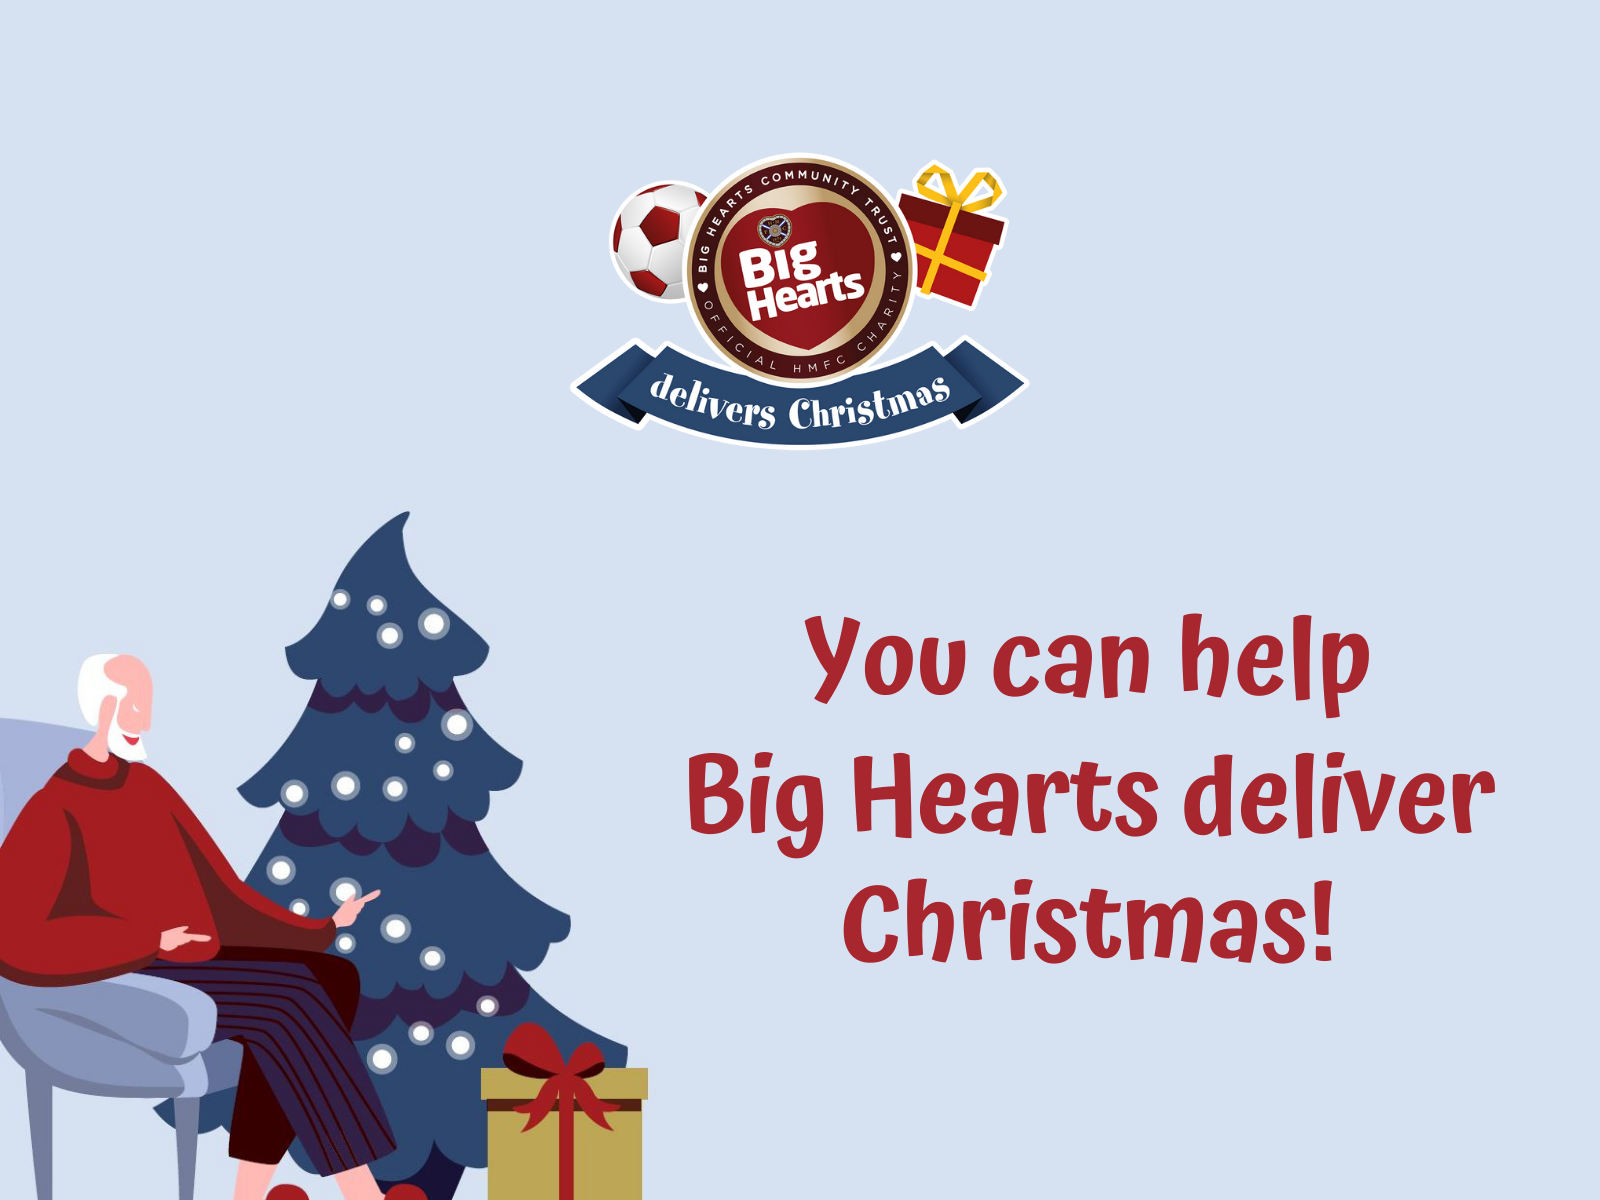  » THIS YEAR BIG HEARTS GOES ON THE ROAD TO DELIVER CHRISTMAS!